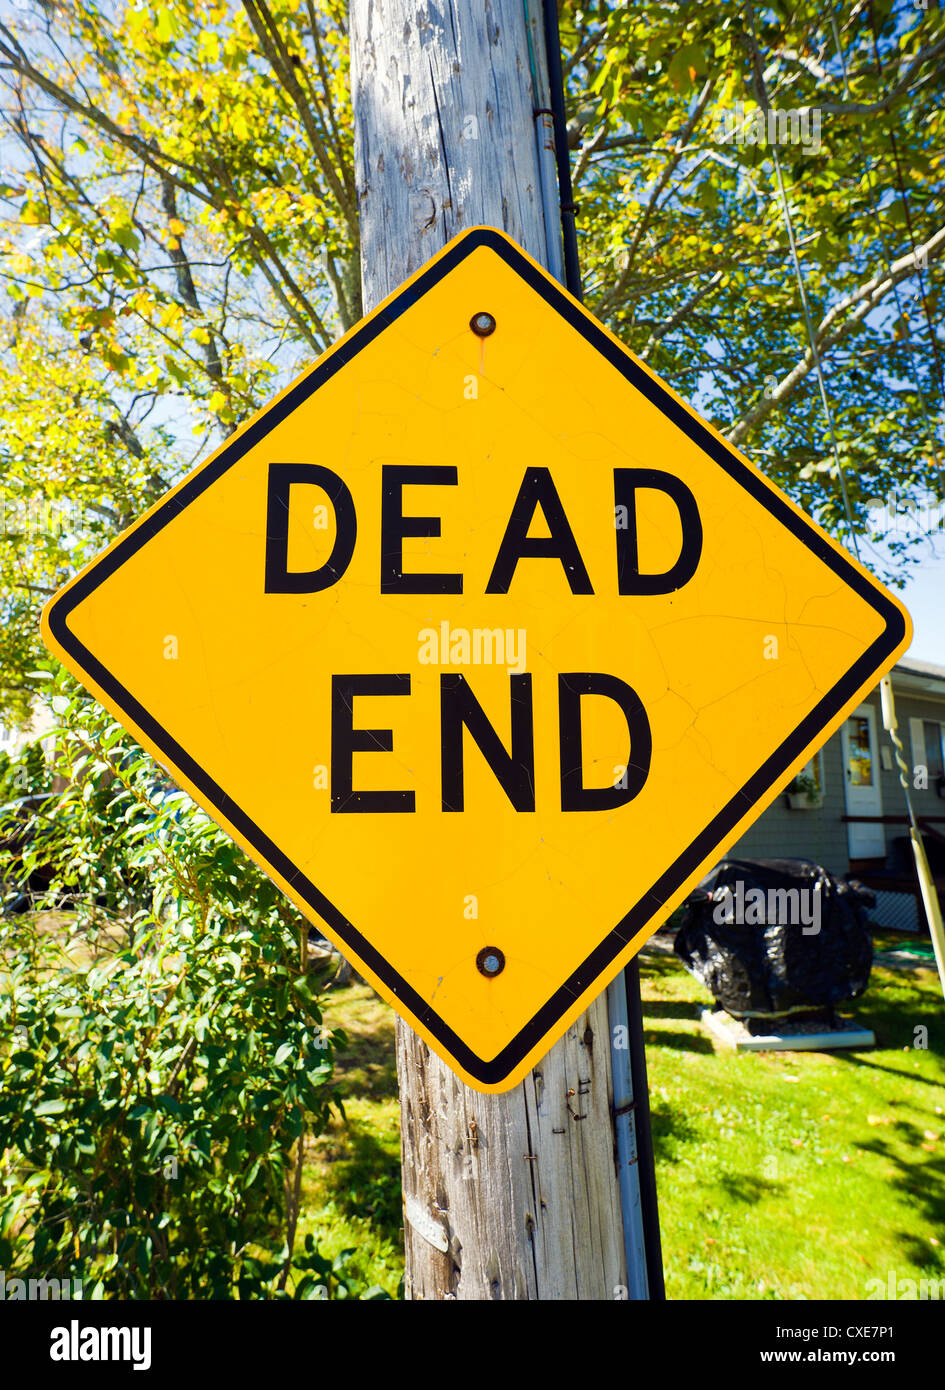 Dead end sign on wooden utility pole. Stock Photo